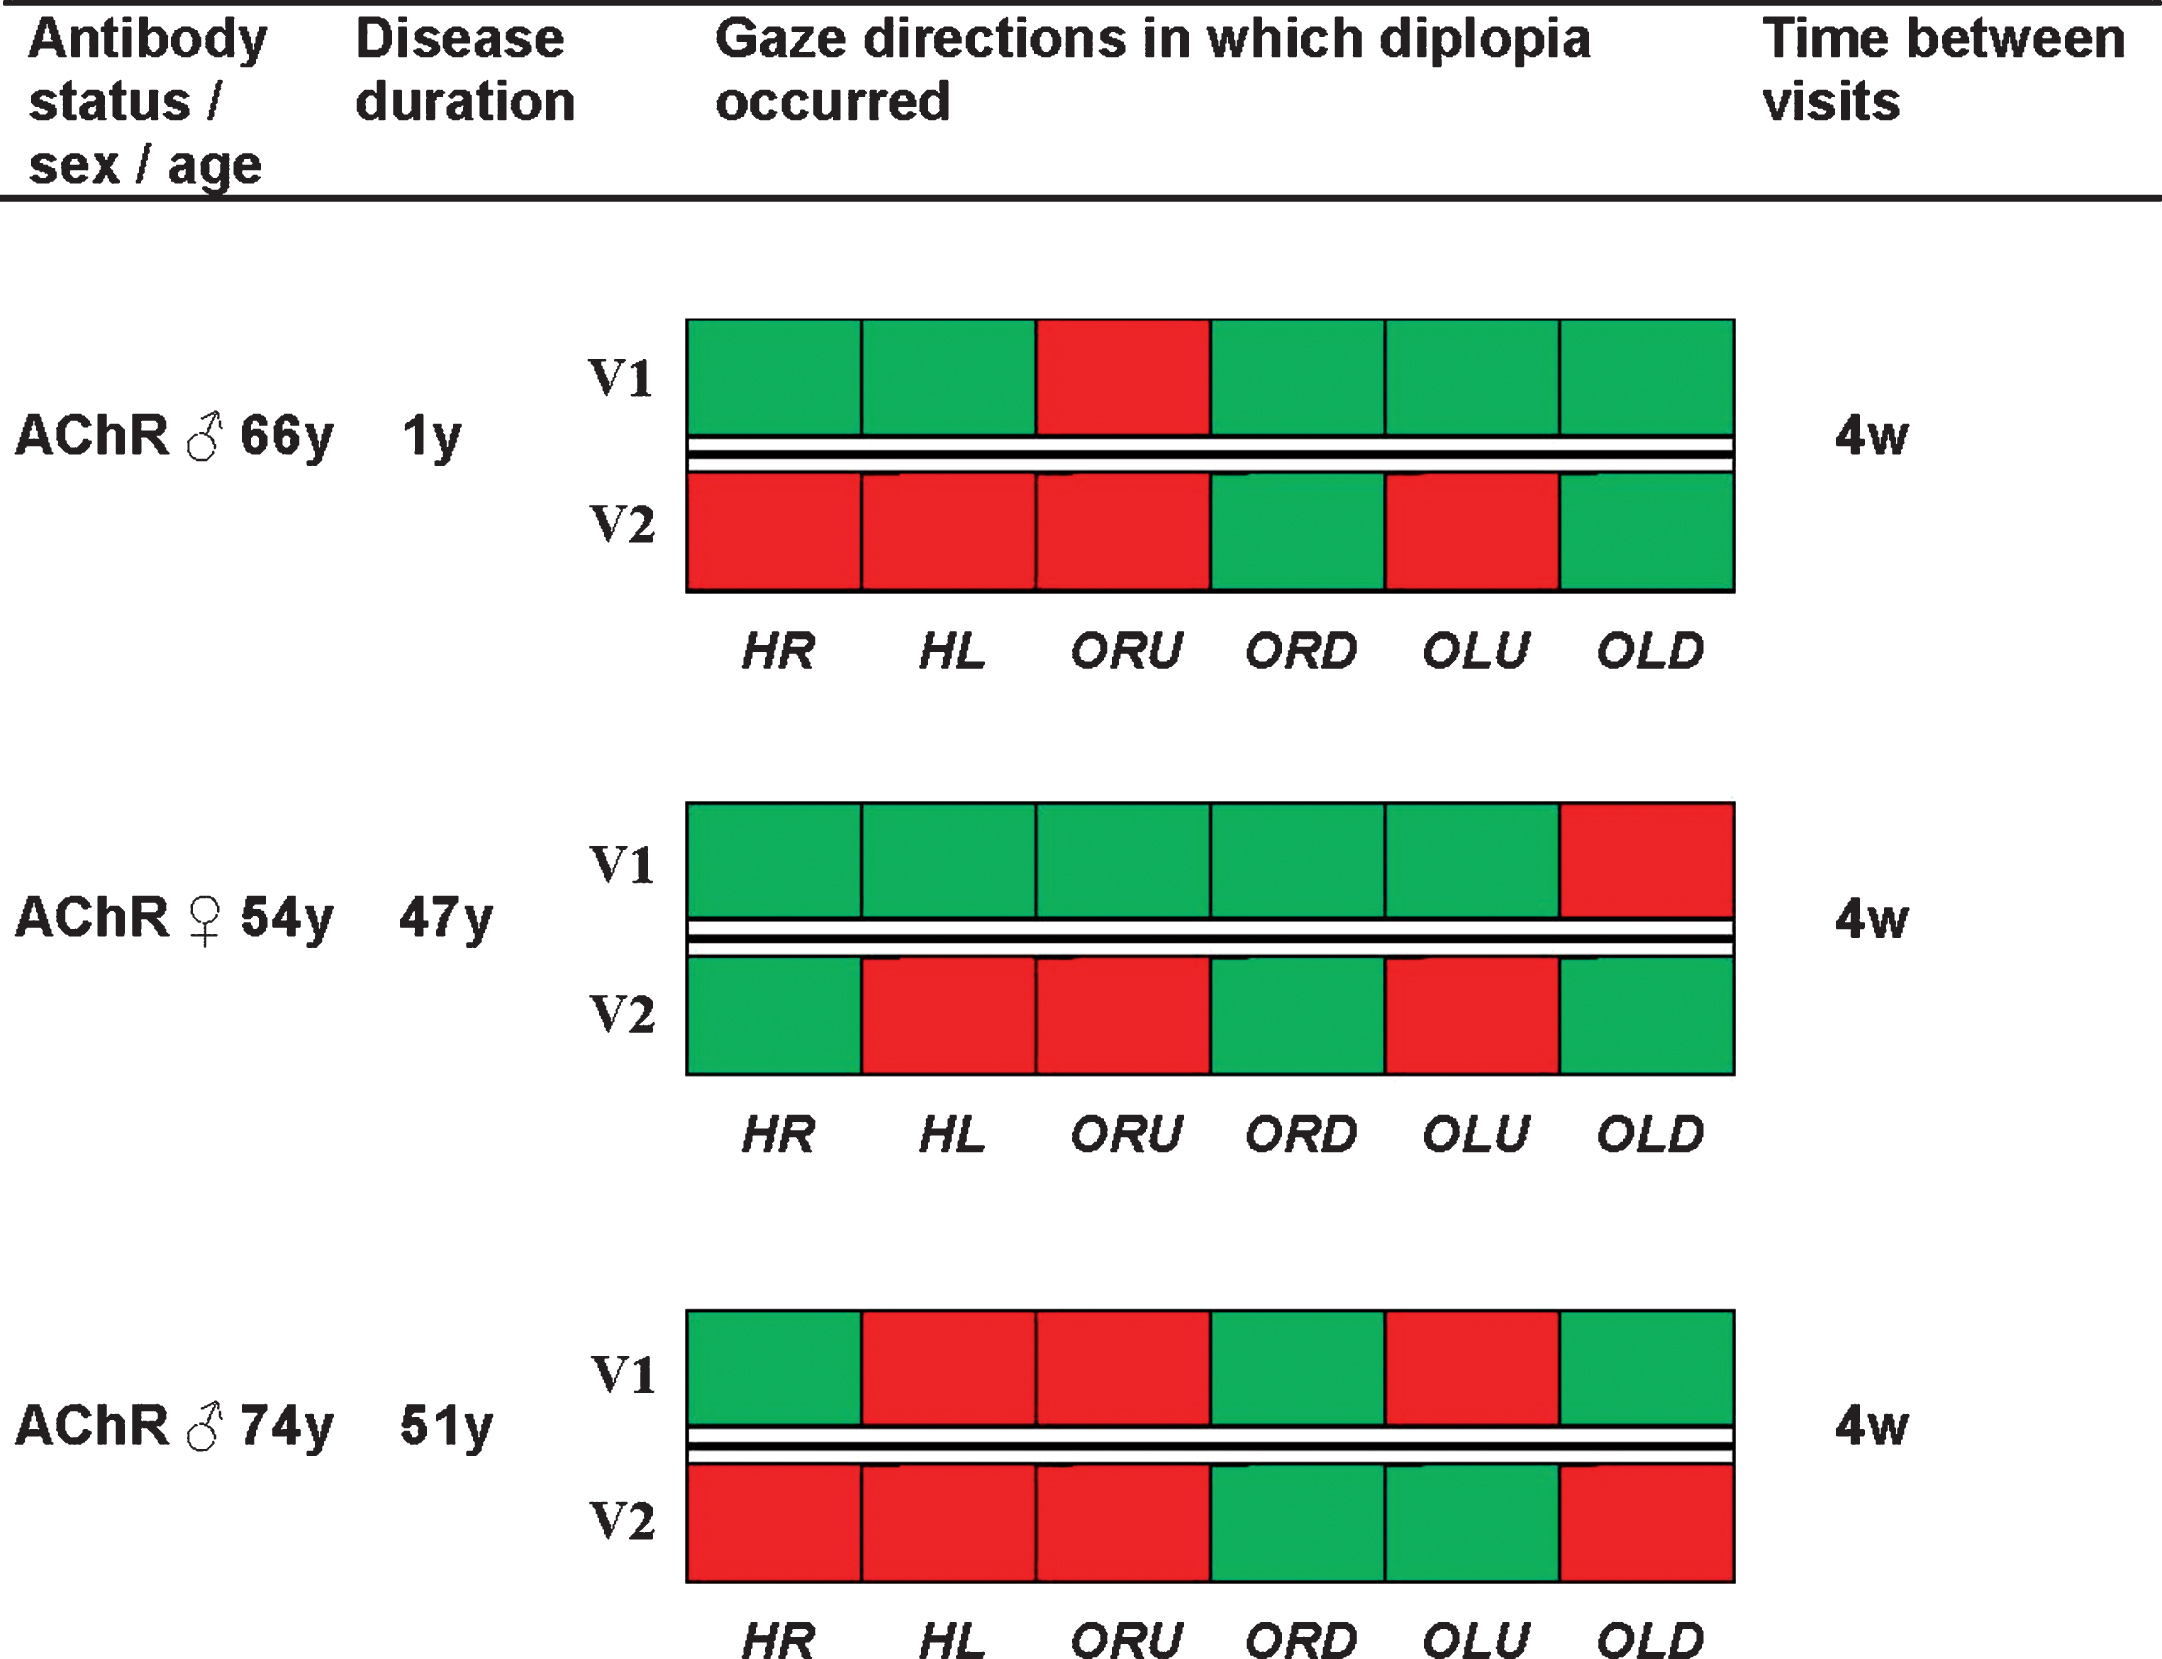 Changes of diplopia patterns in individual MG patients. Baseline characteristics and an overview of gaze directions in which diplopia occurred of three MG patients that had a substantial change of diplopia pattern at the second visit. Red indicates that diplopia occurred in that gaze direction and green indicates that no diplopia occurred in that gaze direction. Abbreviations: HR = horizontal right, HL = horizontal left, ORU = oblique right upward, ORD = oblique right downward, OLU = oblique left upward, OLD = oblique left downward.